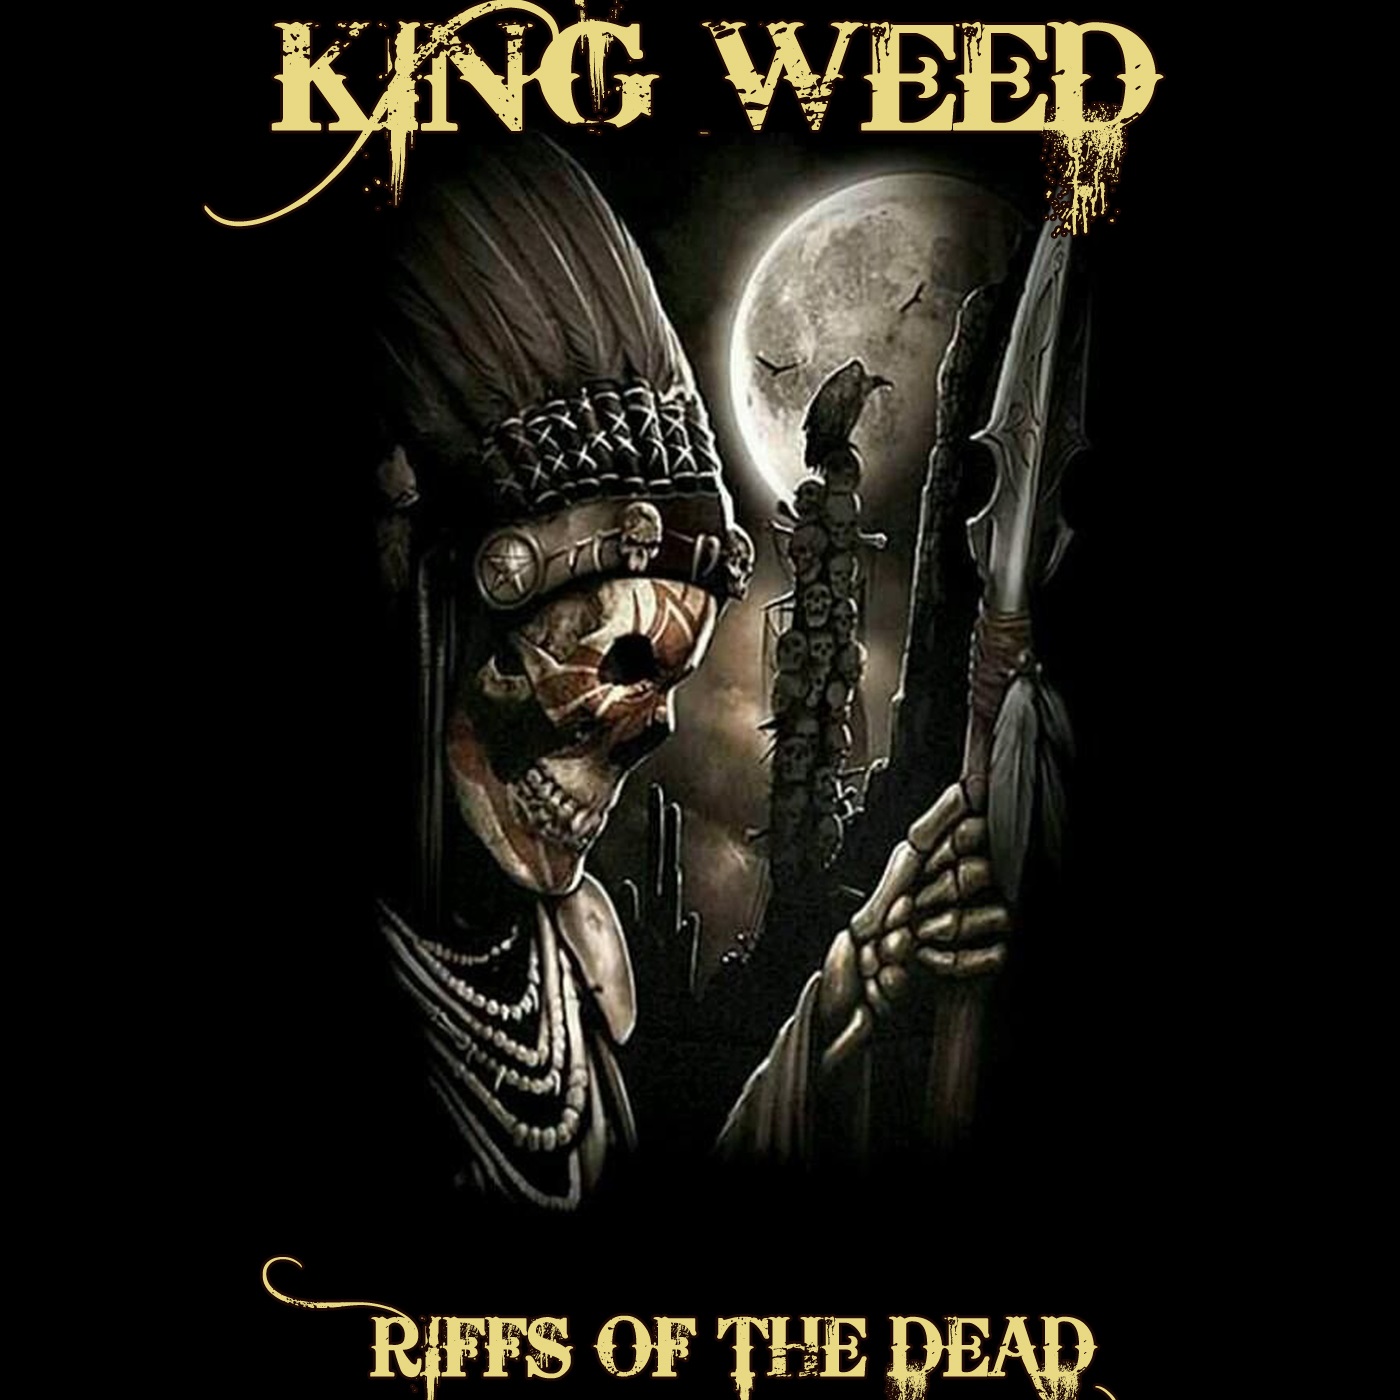 King Weed – RIFFS OF THE DEAD (2020) [FLAC 24bit/44,1kHz]